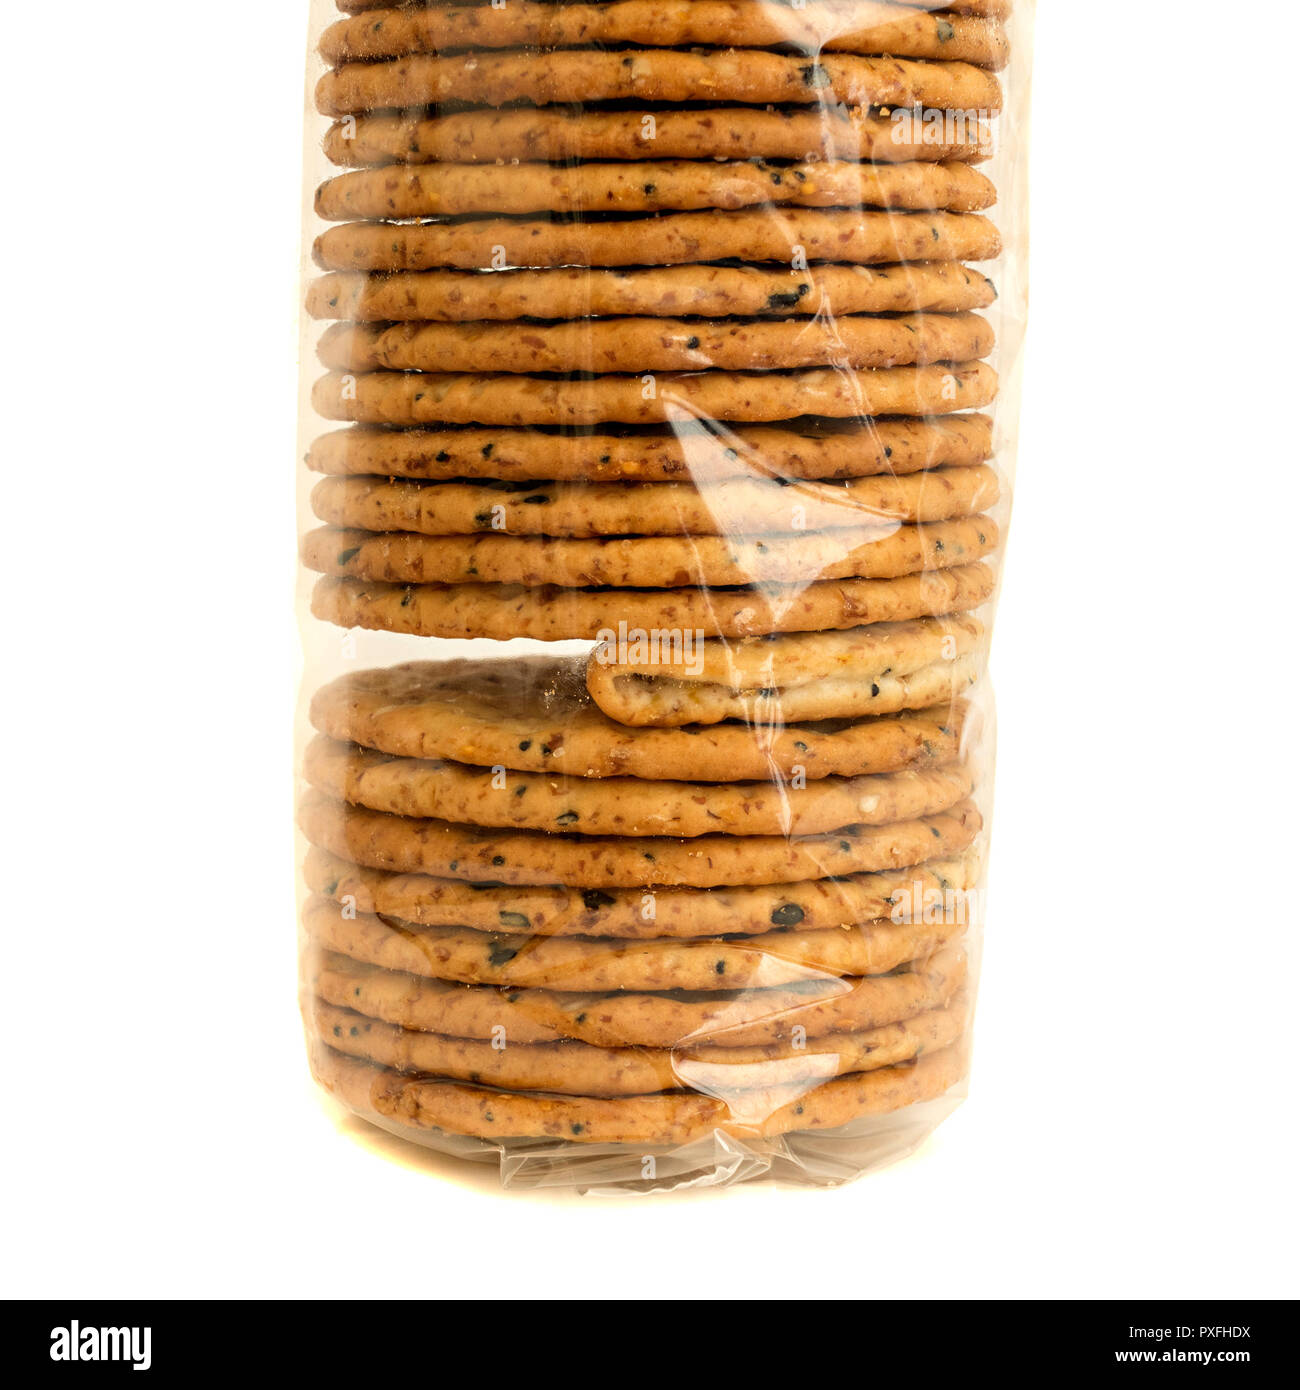 'The Odd One Out' A packet of clear cellophane wrapped biscuits with one faulty folded cracker illustrating a problem or failure in quality control. Stock Photo